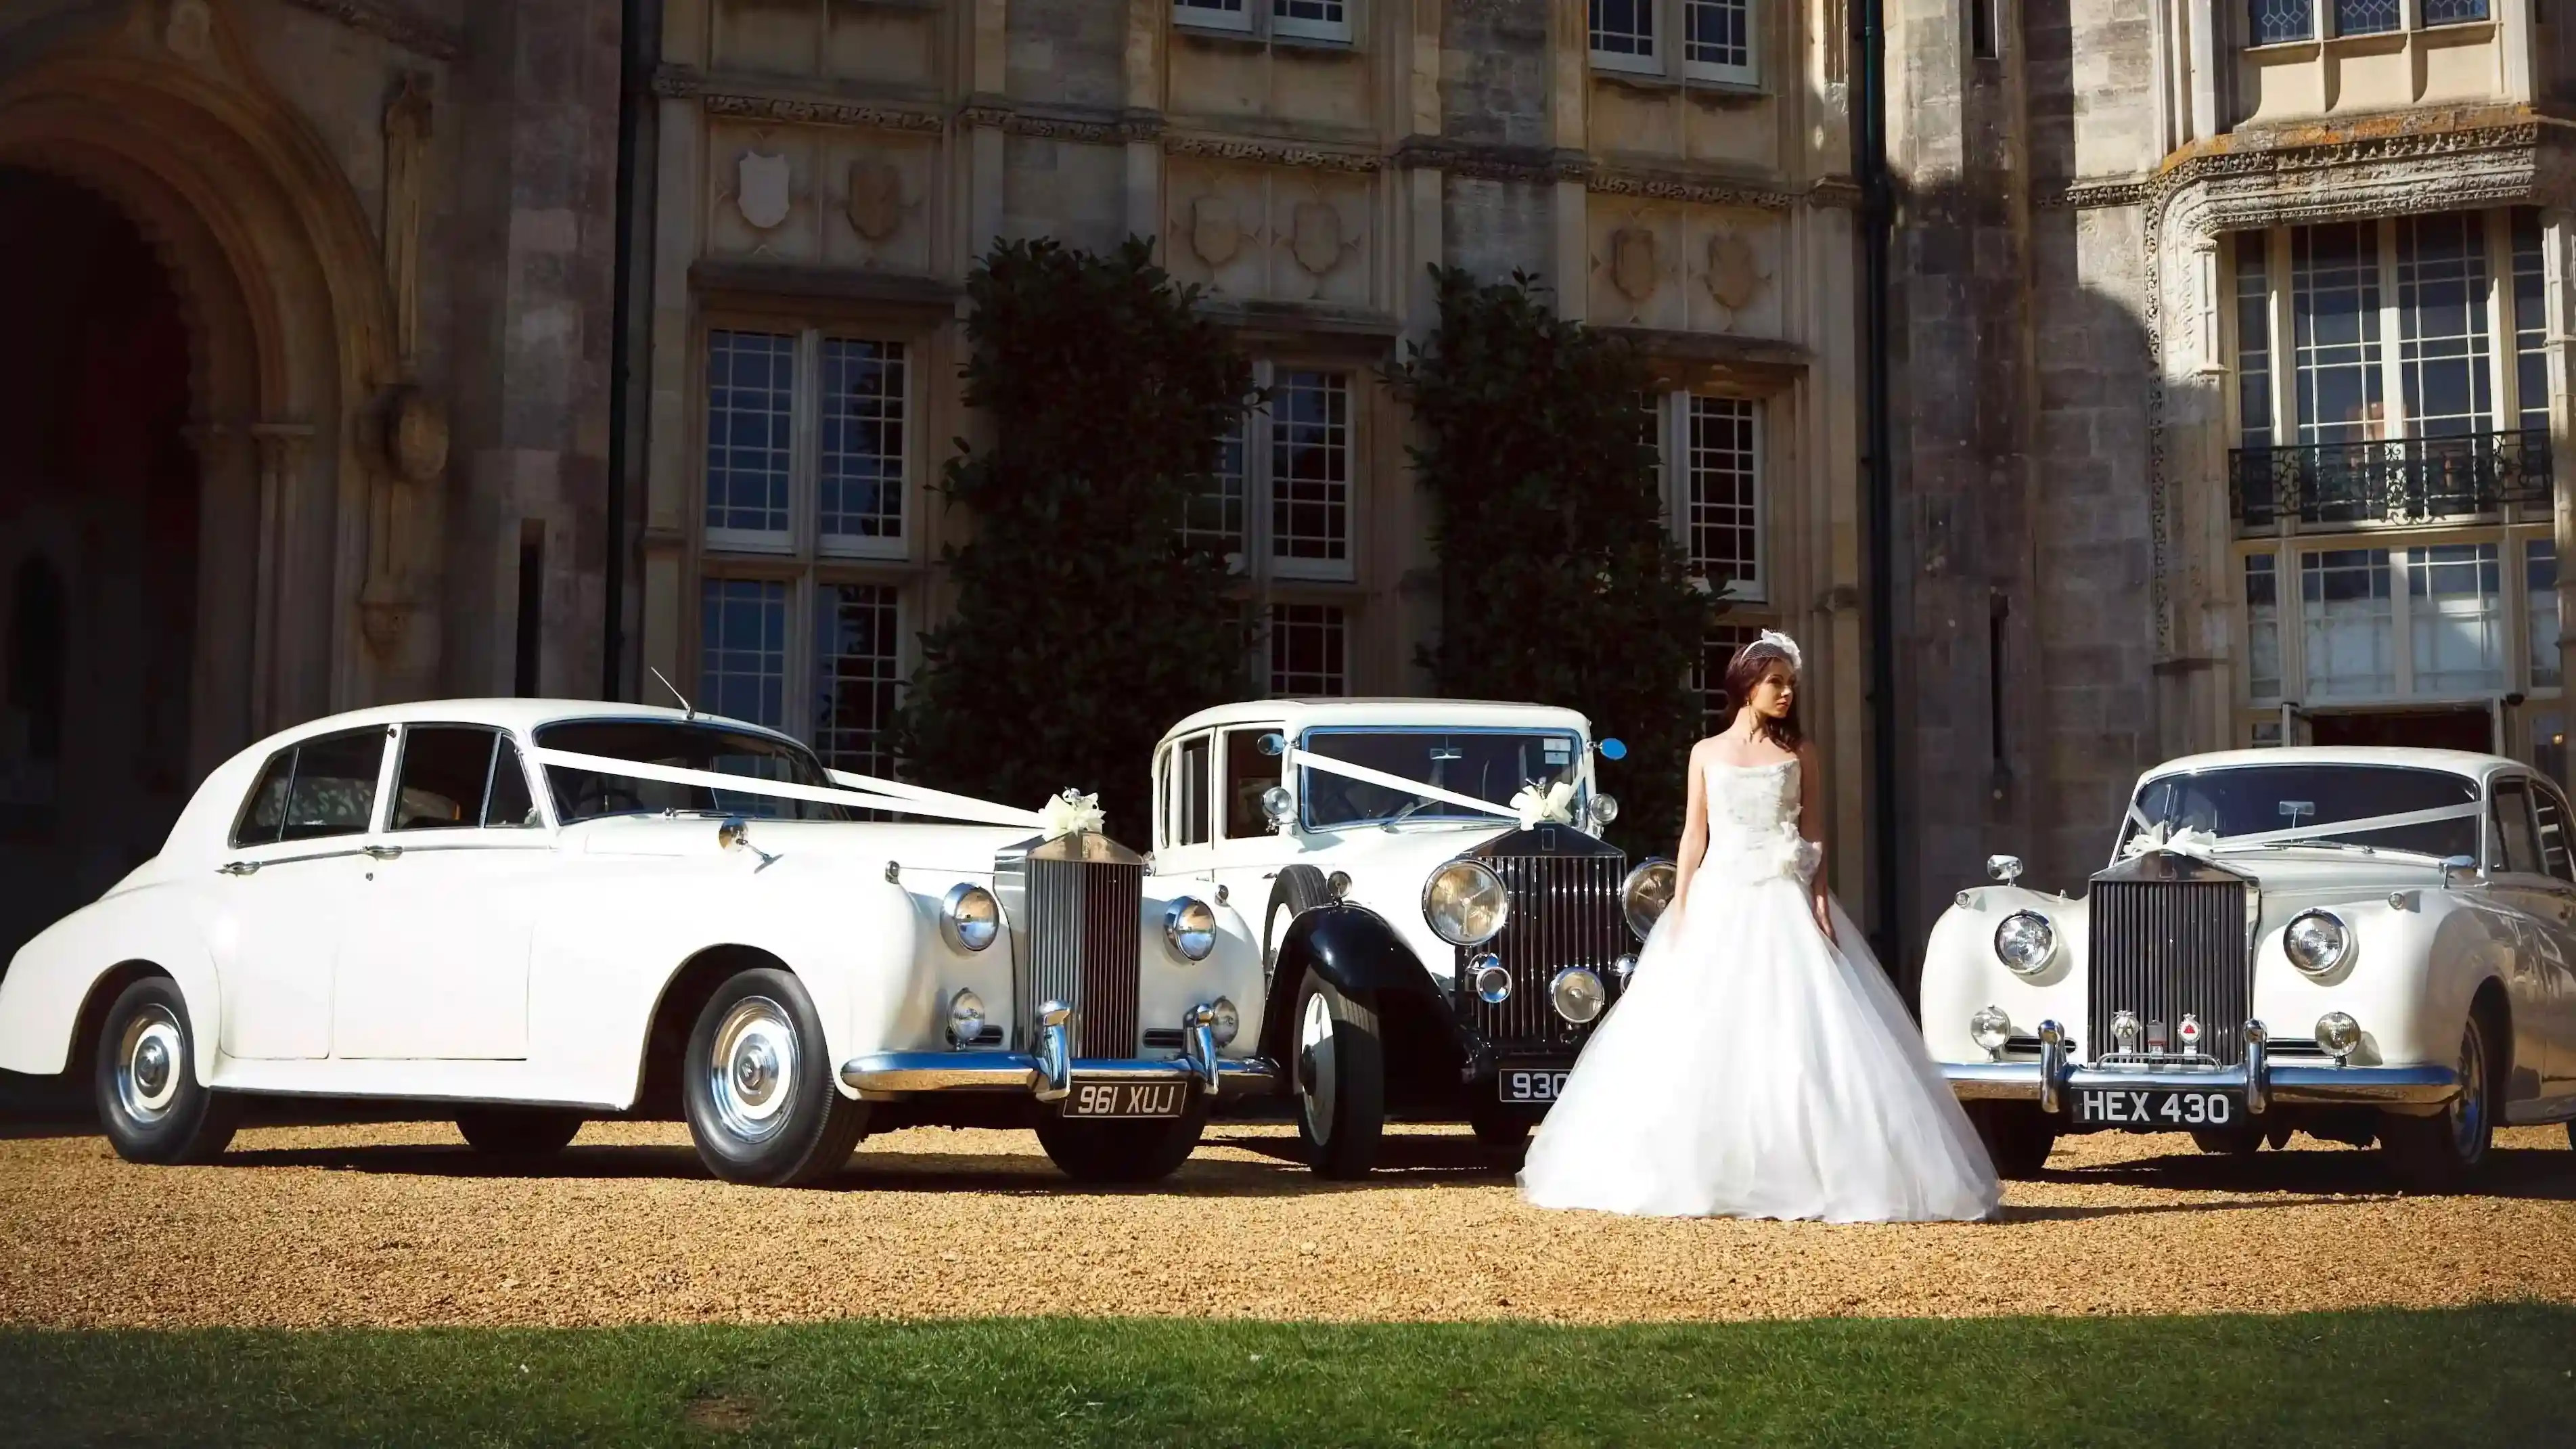 Selection of three classic and Vintage Rolls-Royce in White with Bride wearing a white wedding dress standing in the middle of the vehicles. Background is a popular wedding venue in the style of a castle in Dorset.